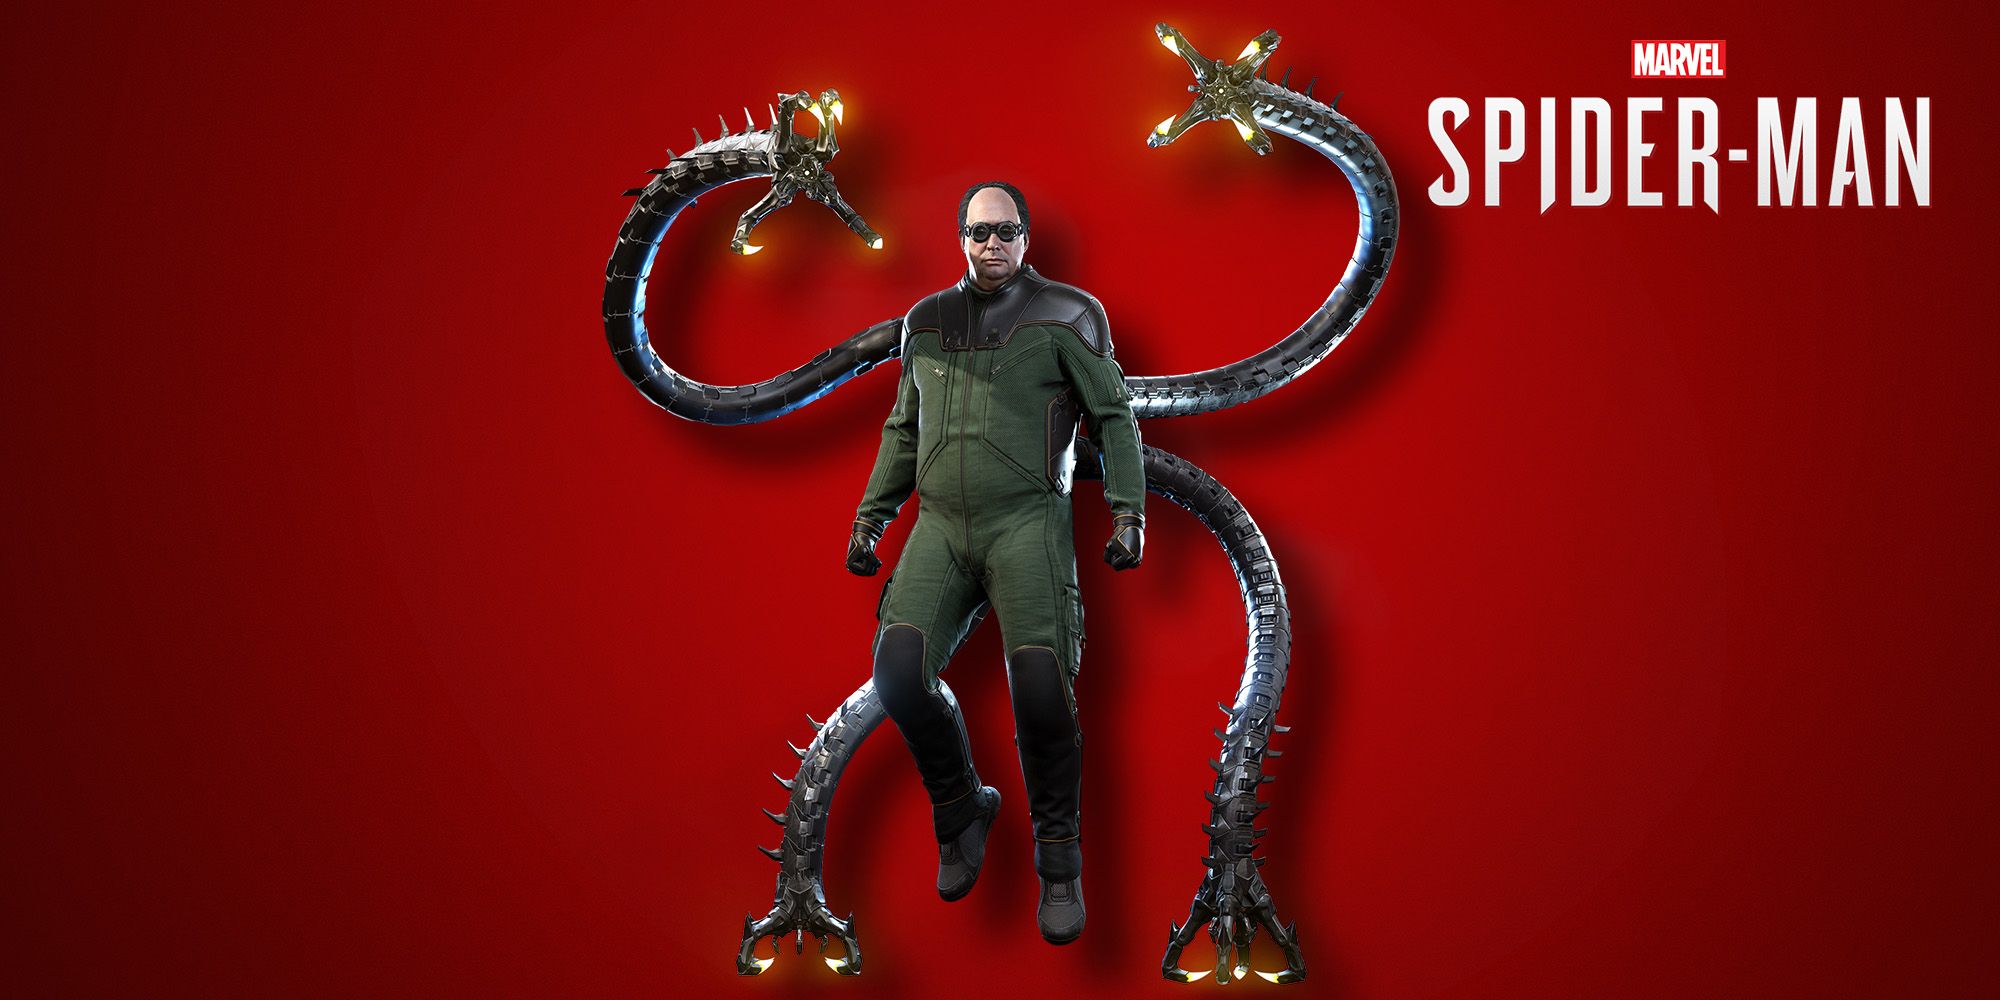 Doctor Octopus stands ready to attack. Red background. Spider-Man logo in top right of image. 